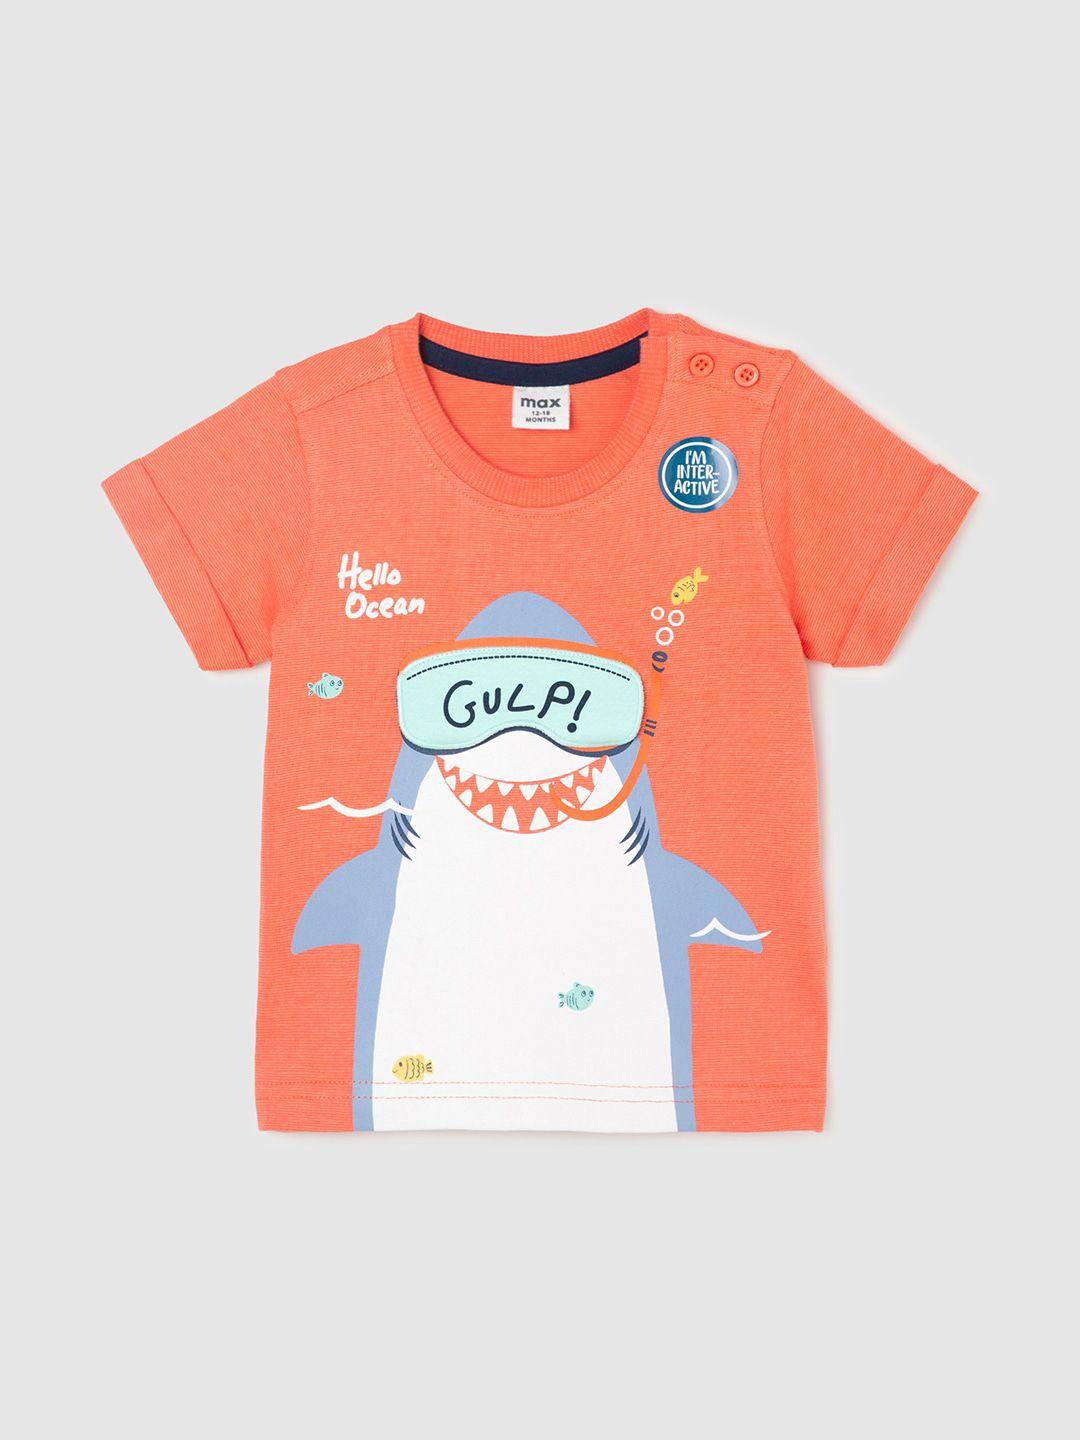 max-infant-boys-graphic-printed-pure-cotton-t-shirt